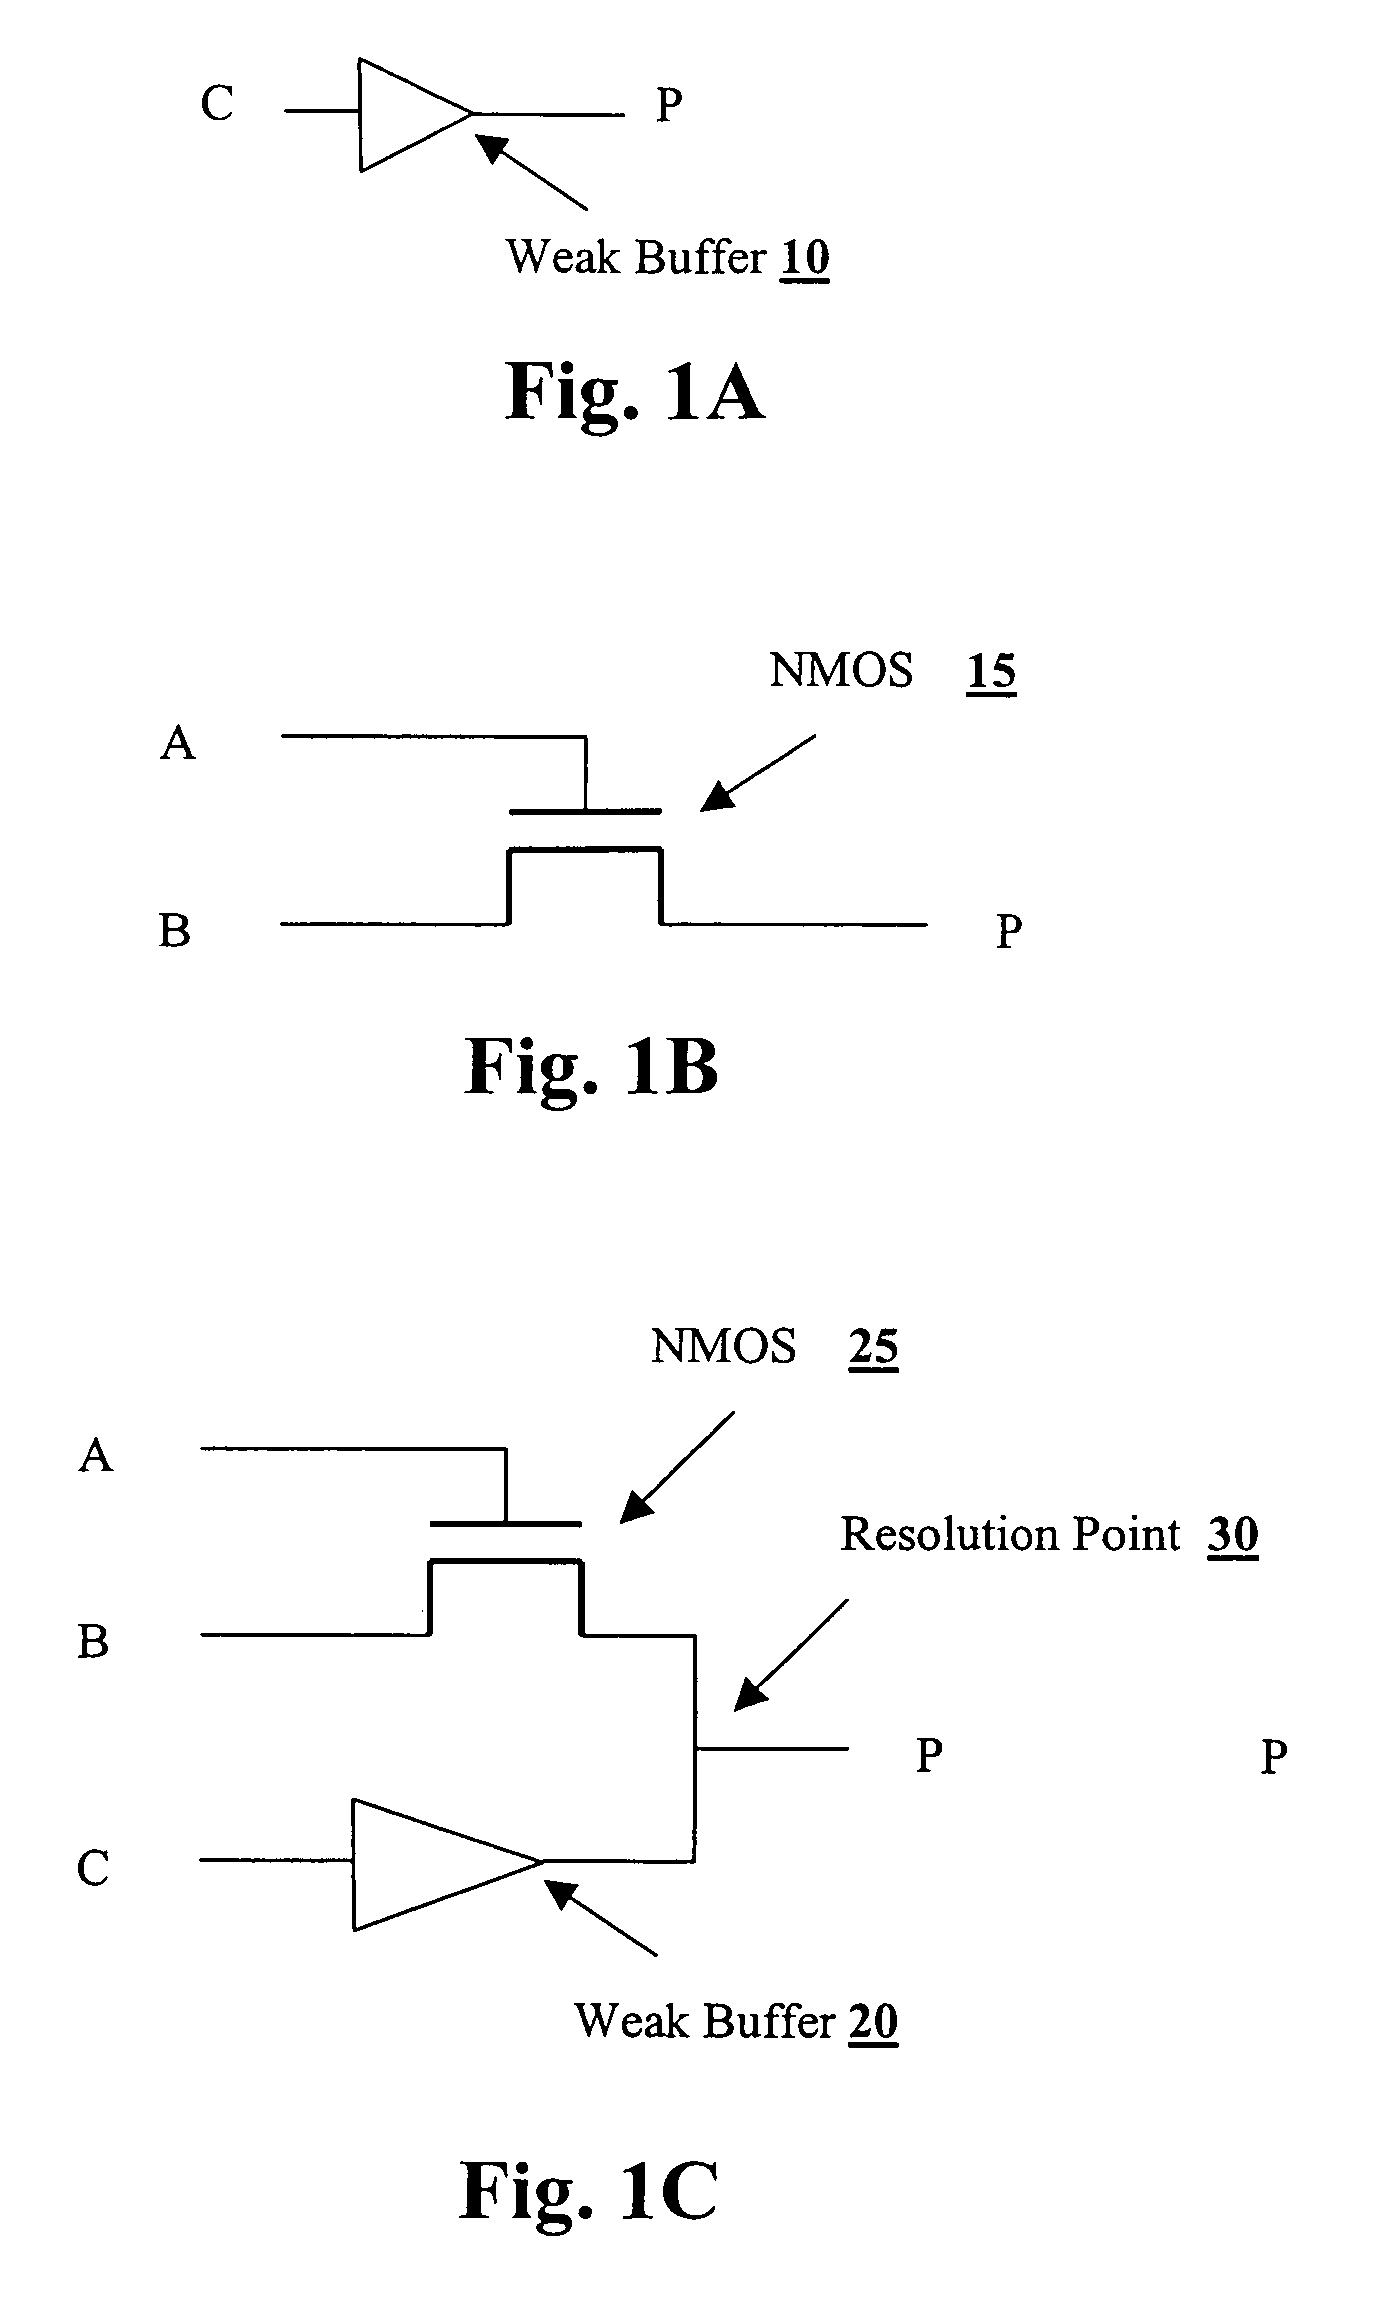 Method and system for creating a boolean model of multi-path and multi-strength signals for verification